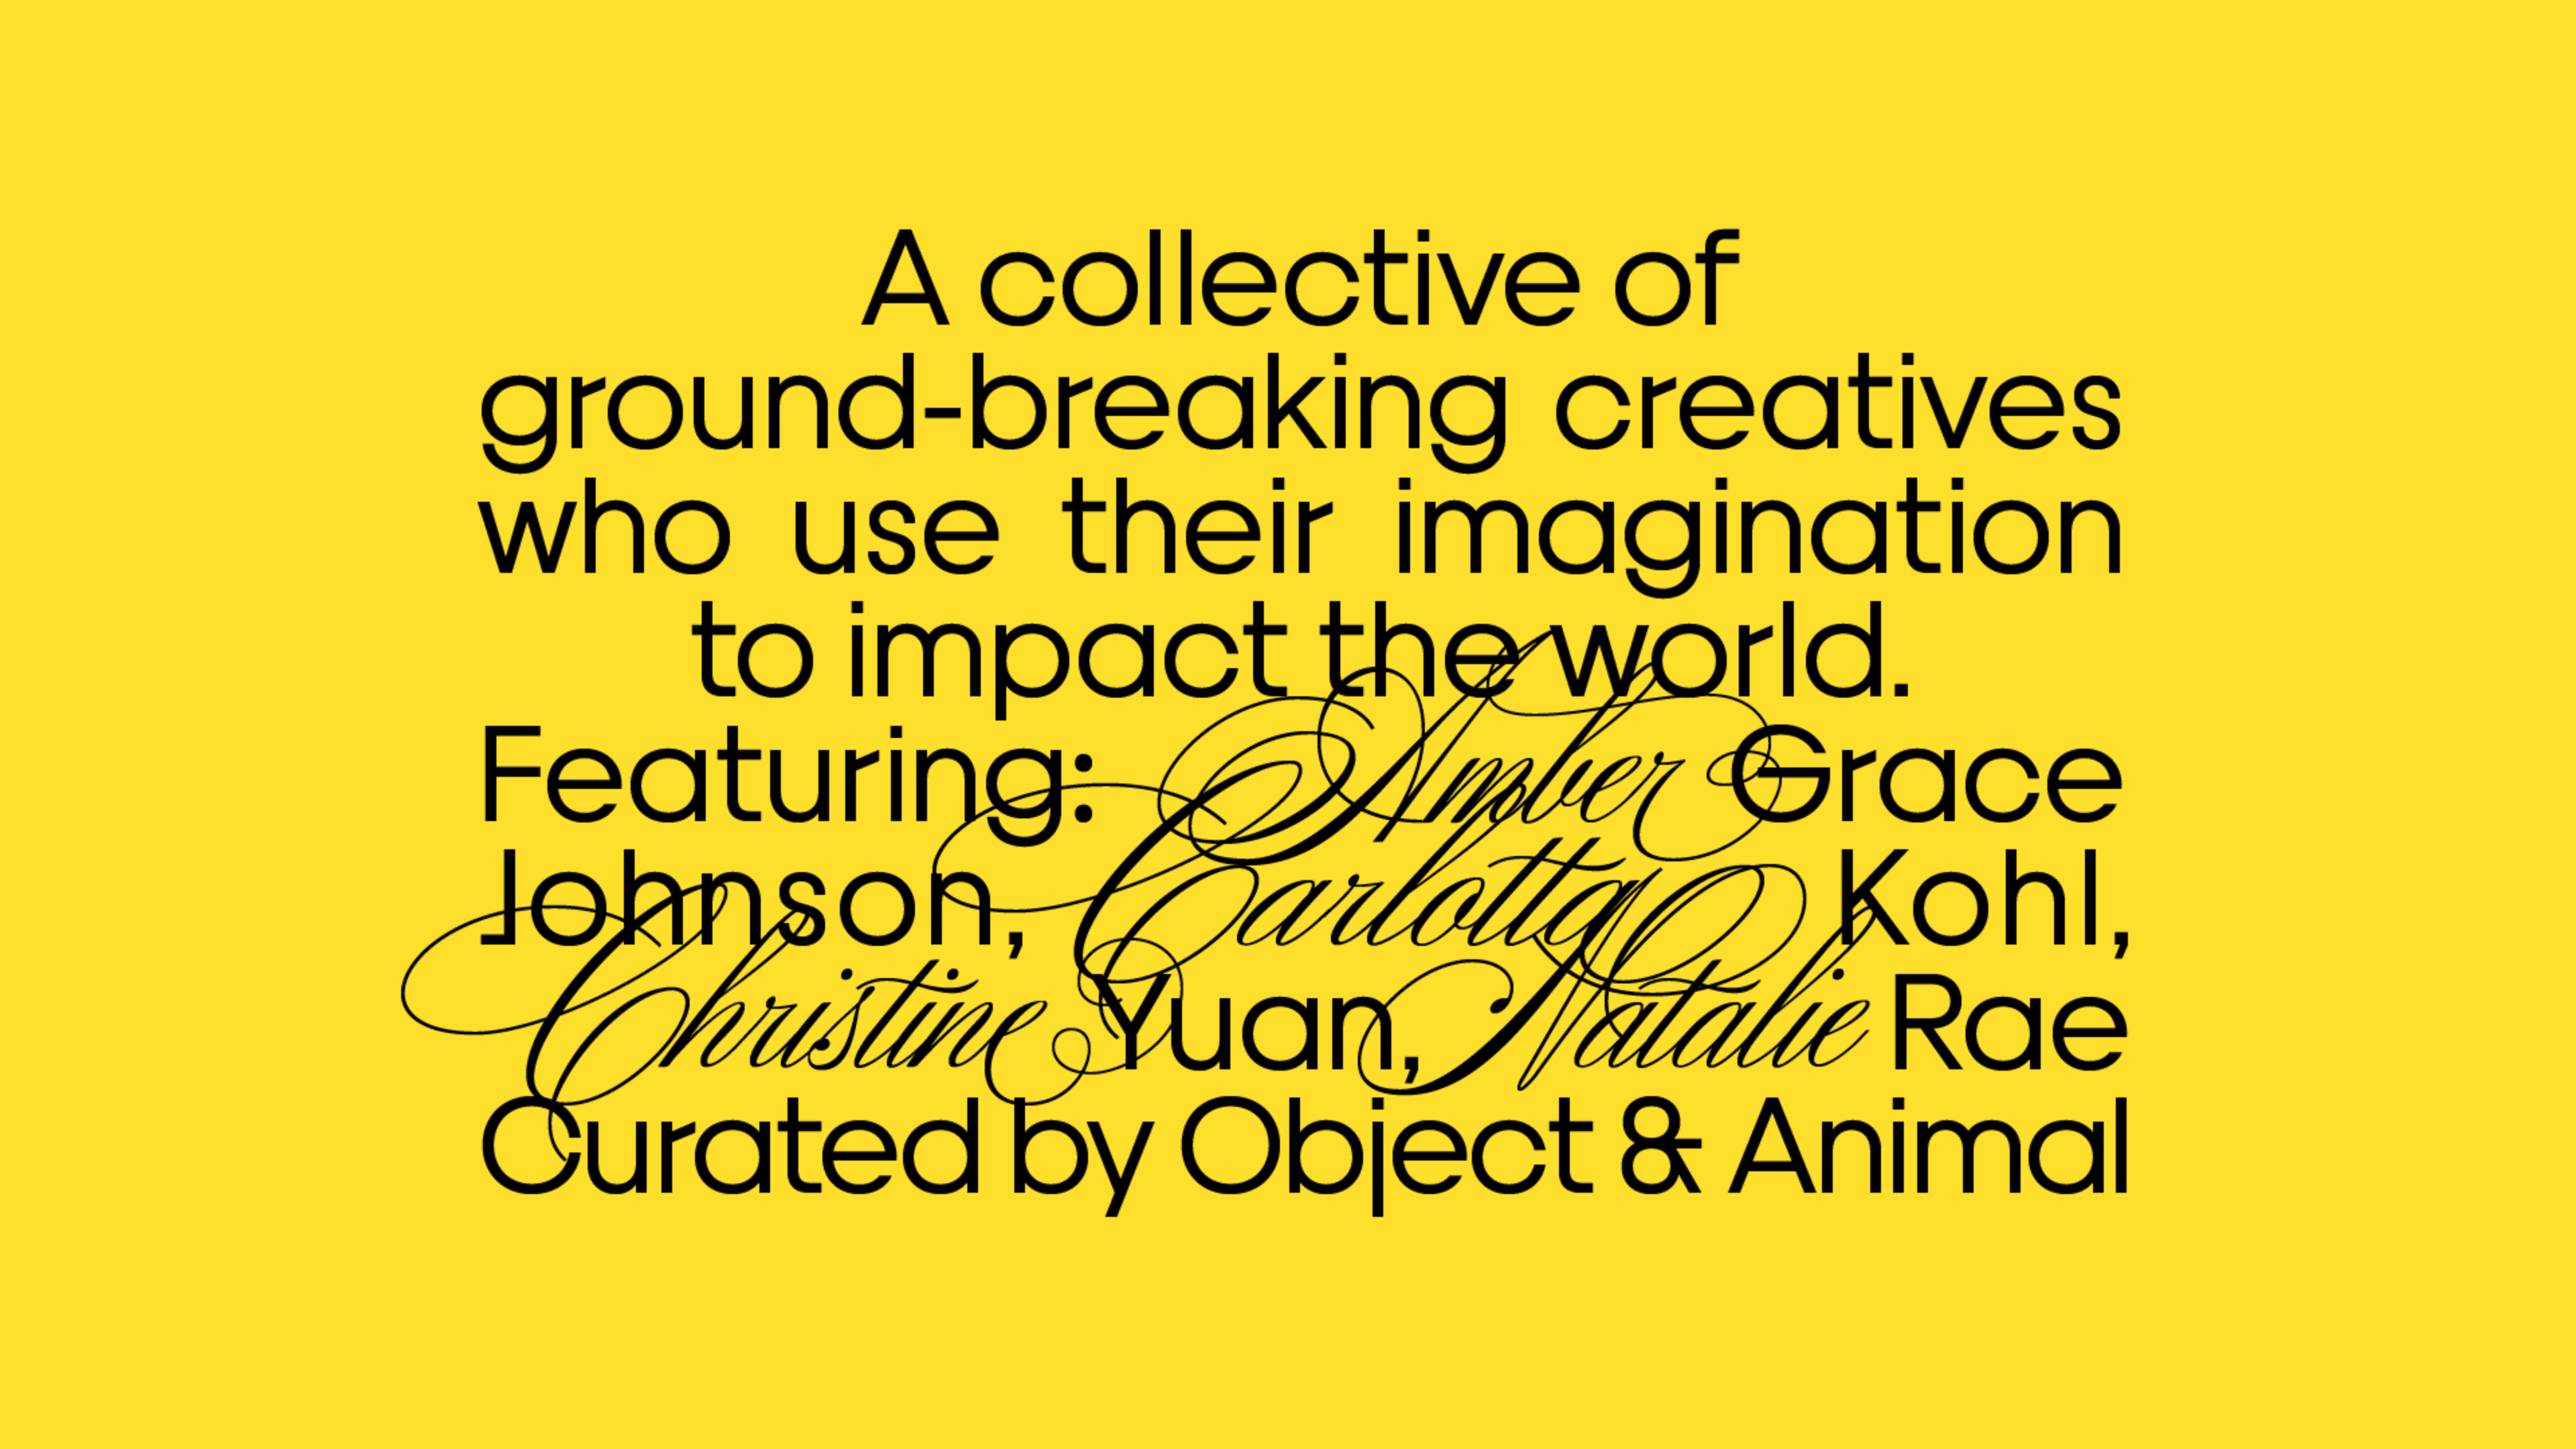 A collective of ground-breaking creatives who use their imagination to. impact the world. Featuring Amber Grace Johnson, Carlotta Kohl, Christine Yuan, Natalie Rae. Curated by Object & Animal